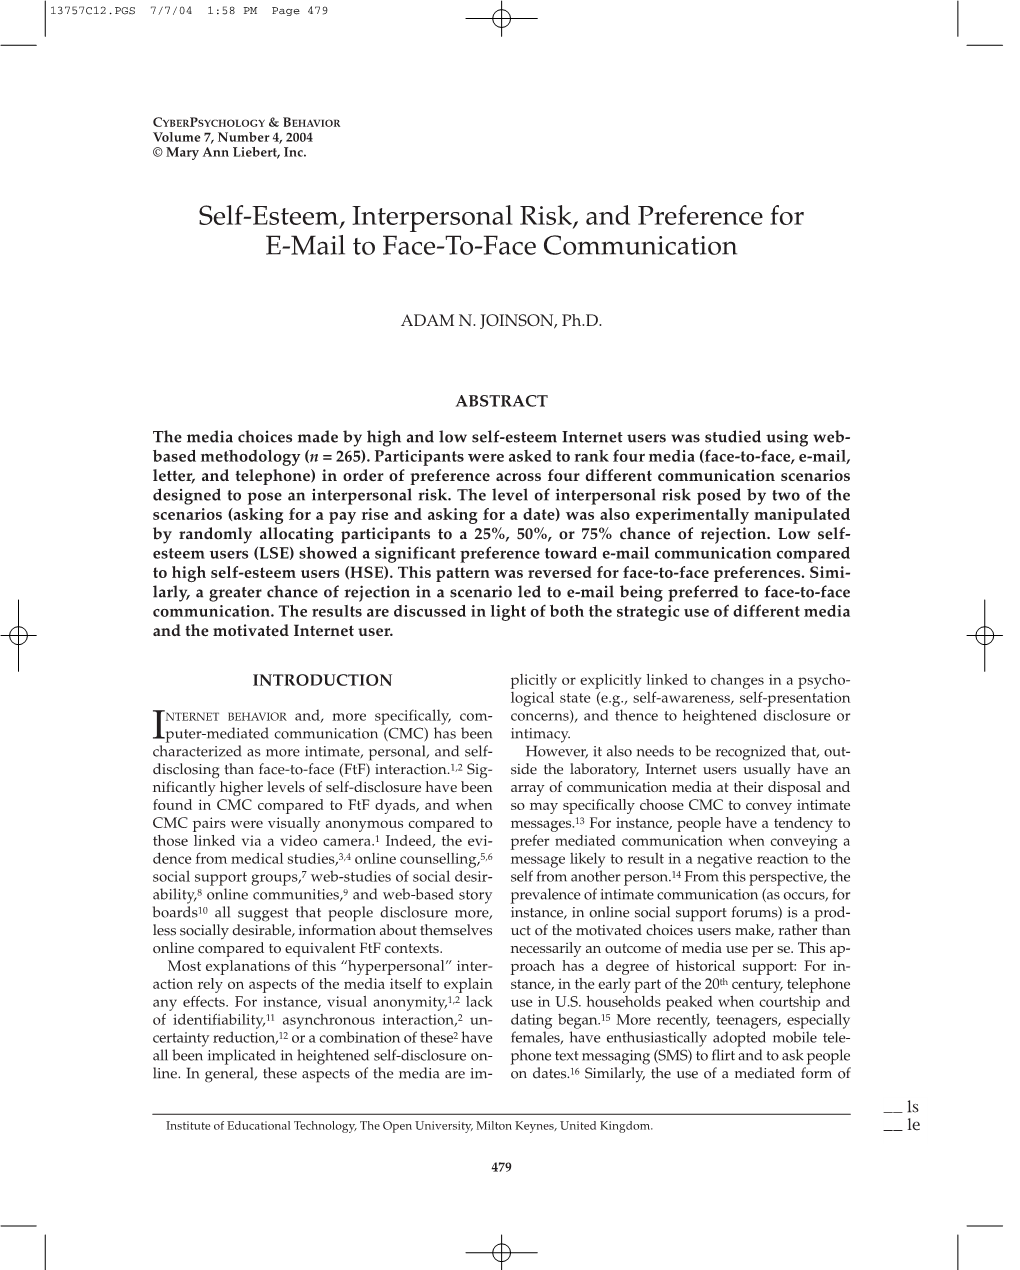 Self-Esteem, Interpersonal Risk, and Preference for E-Mail to Face-To-Face Communication